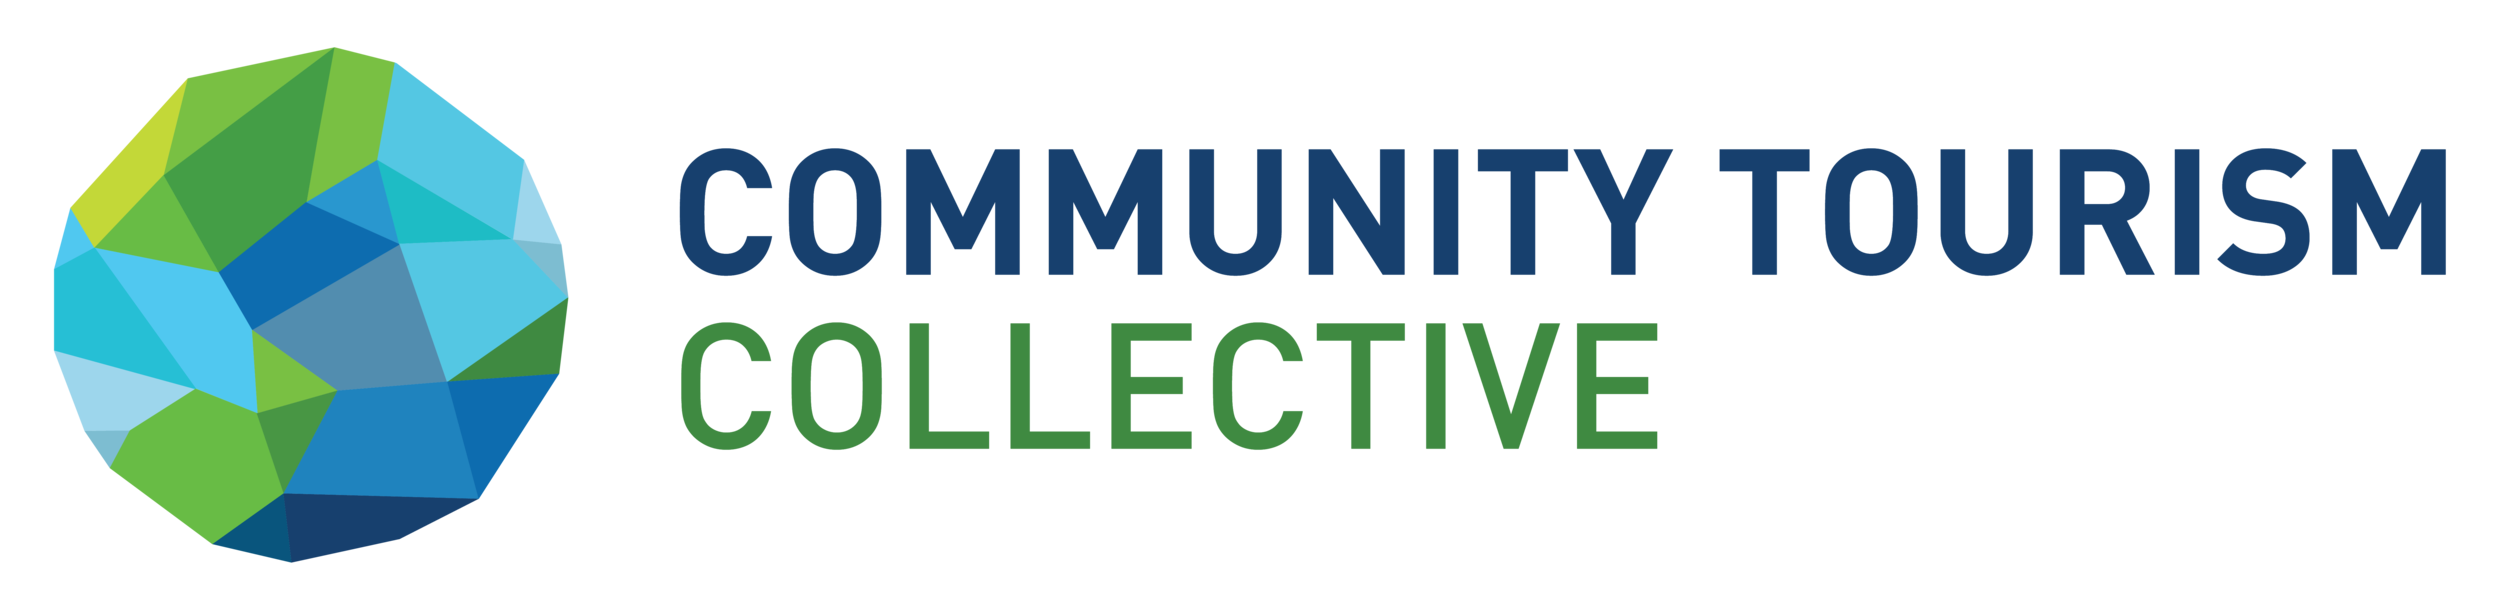 Community Tourism Collective2020-01.png